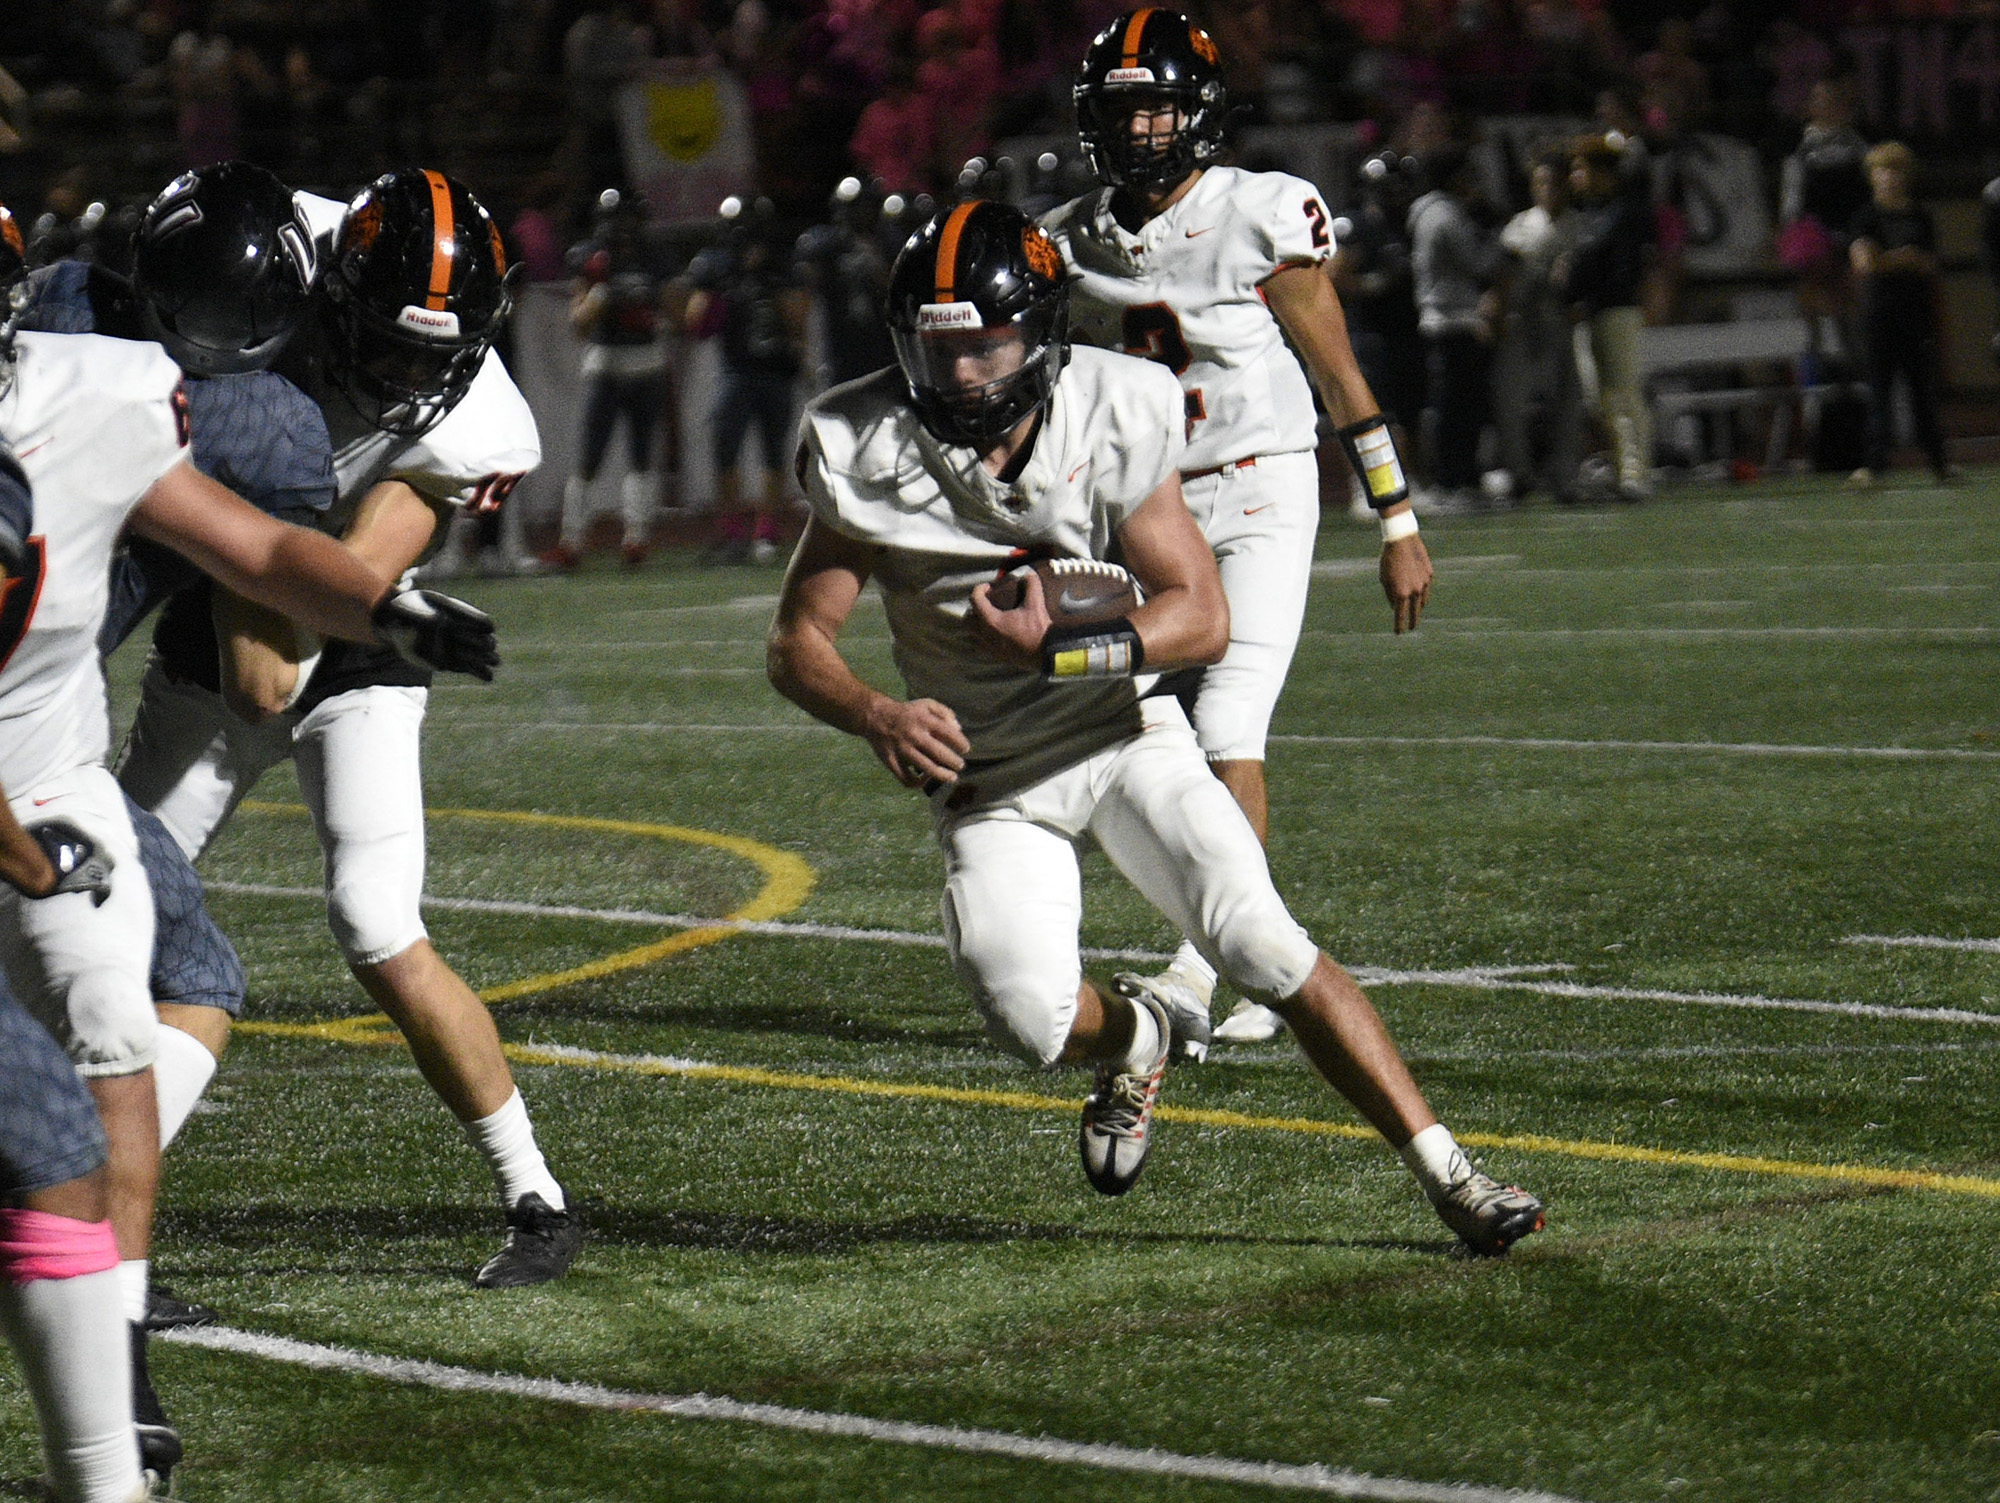 Jacob Champine of Battle Ground runs the ball against Union in a game at McKenzie Stadium on Thursday, Oct. 12, 2023.